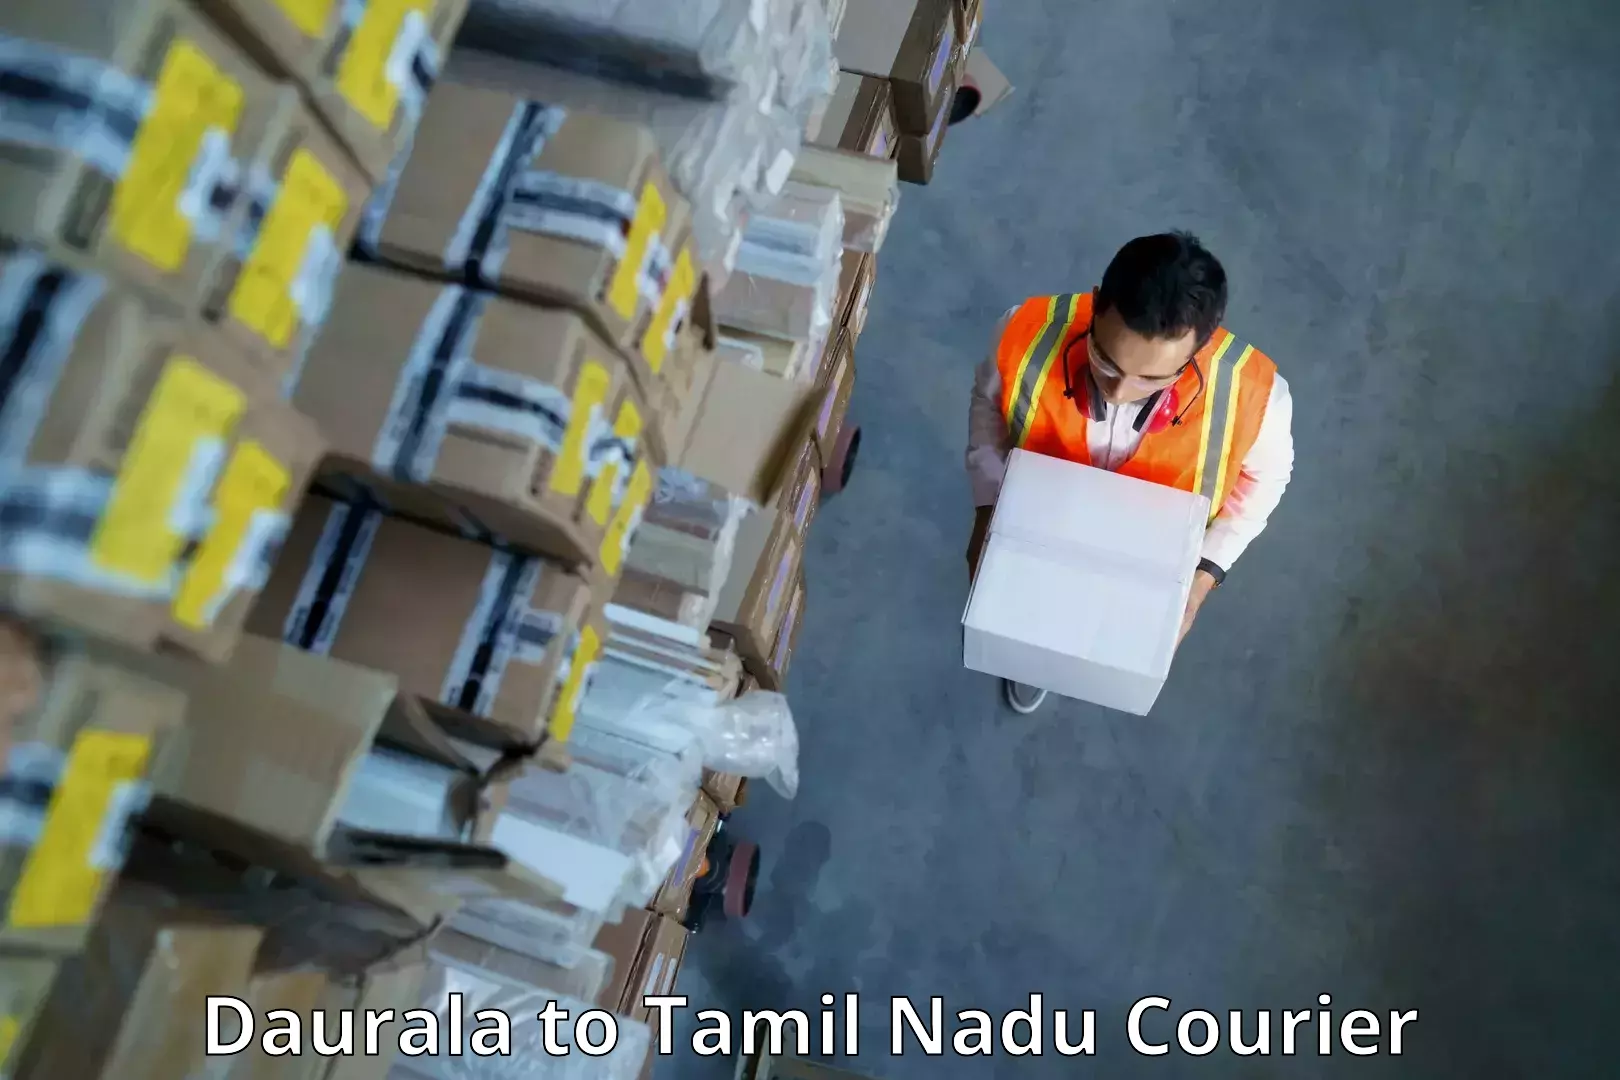 Next-day delivery options Daurala to Melmaruvathur